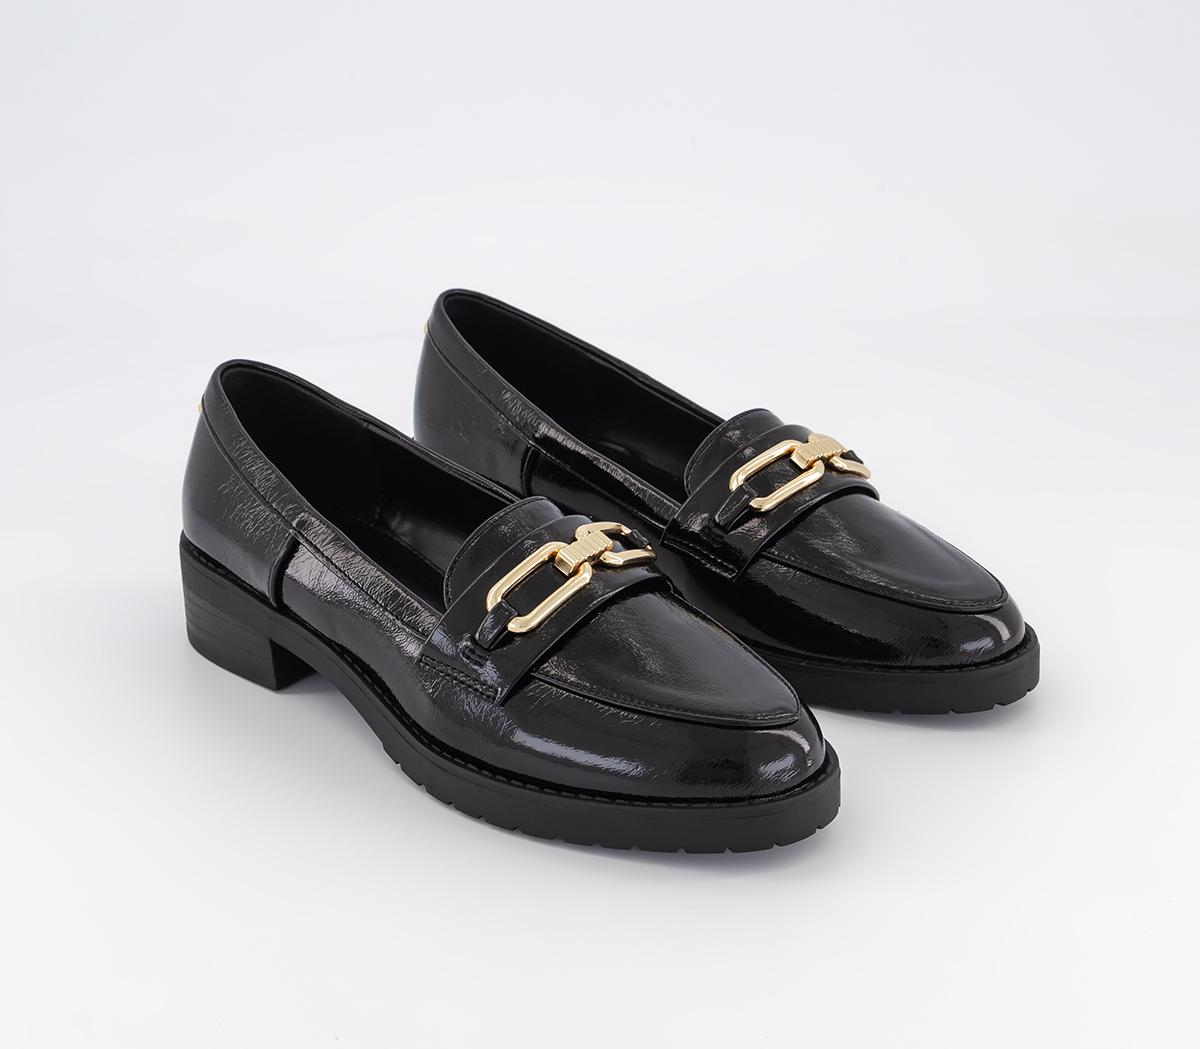 OFFICE Fox Trot Trim Loafers Black - Flat Shoes for Women